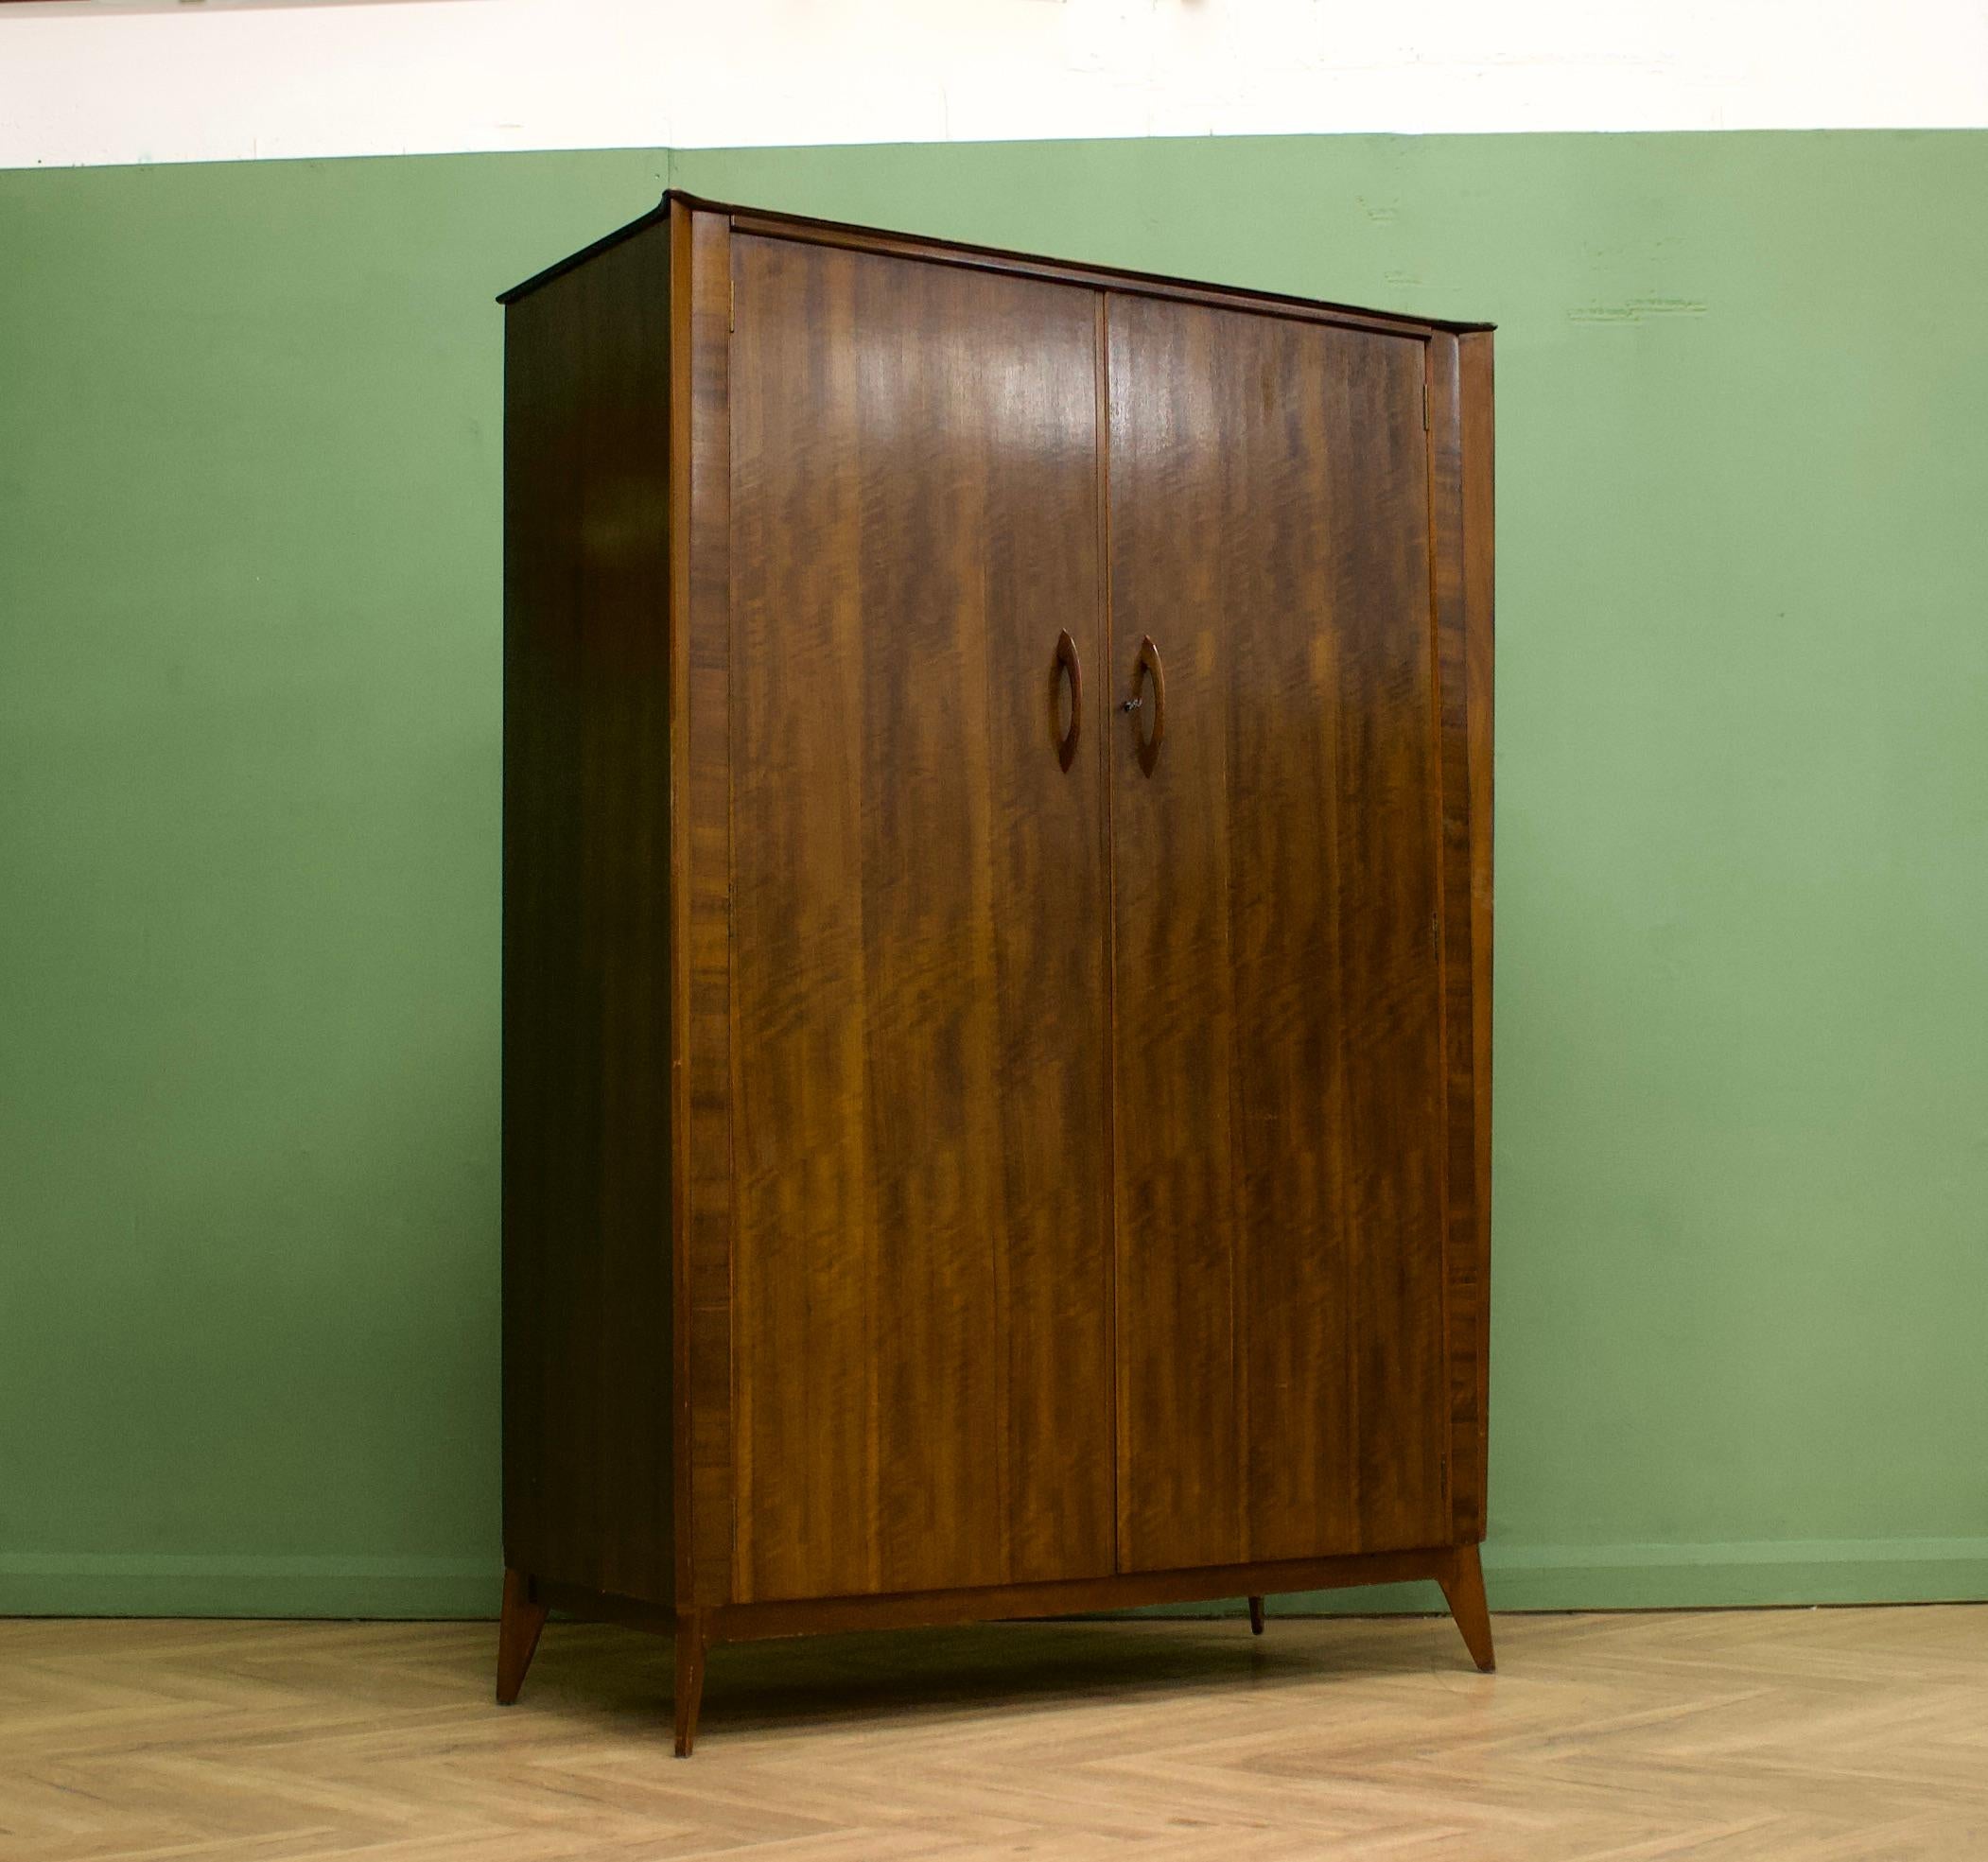 British Midcentury Vintage Walnut Wardrobe from Waring and Gillow, 1960s